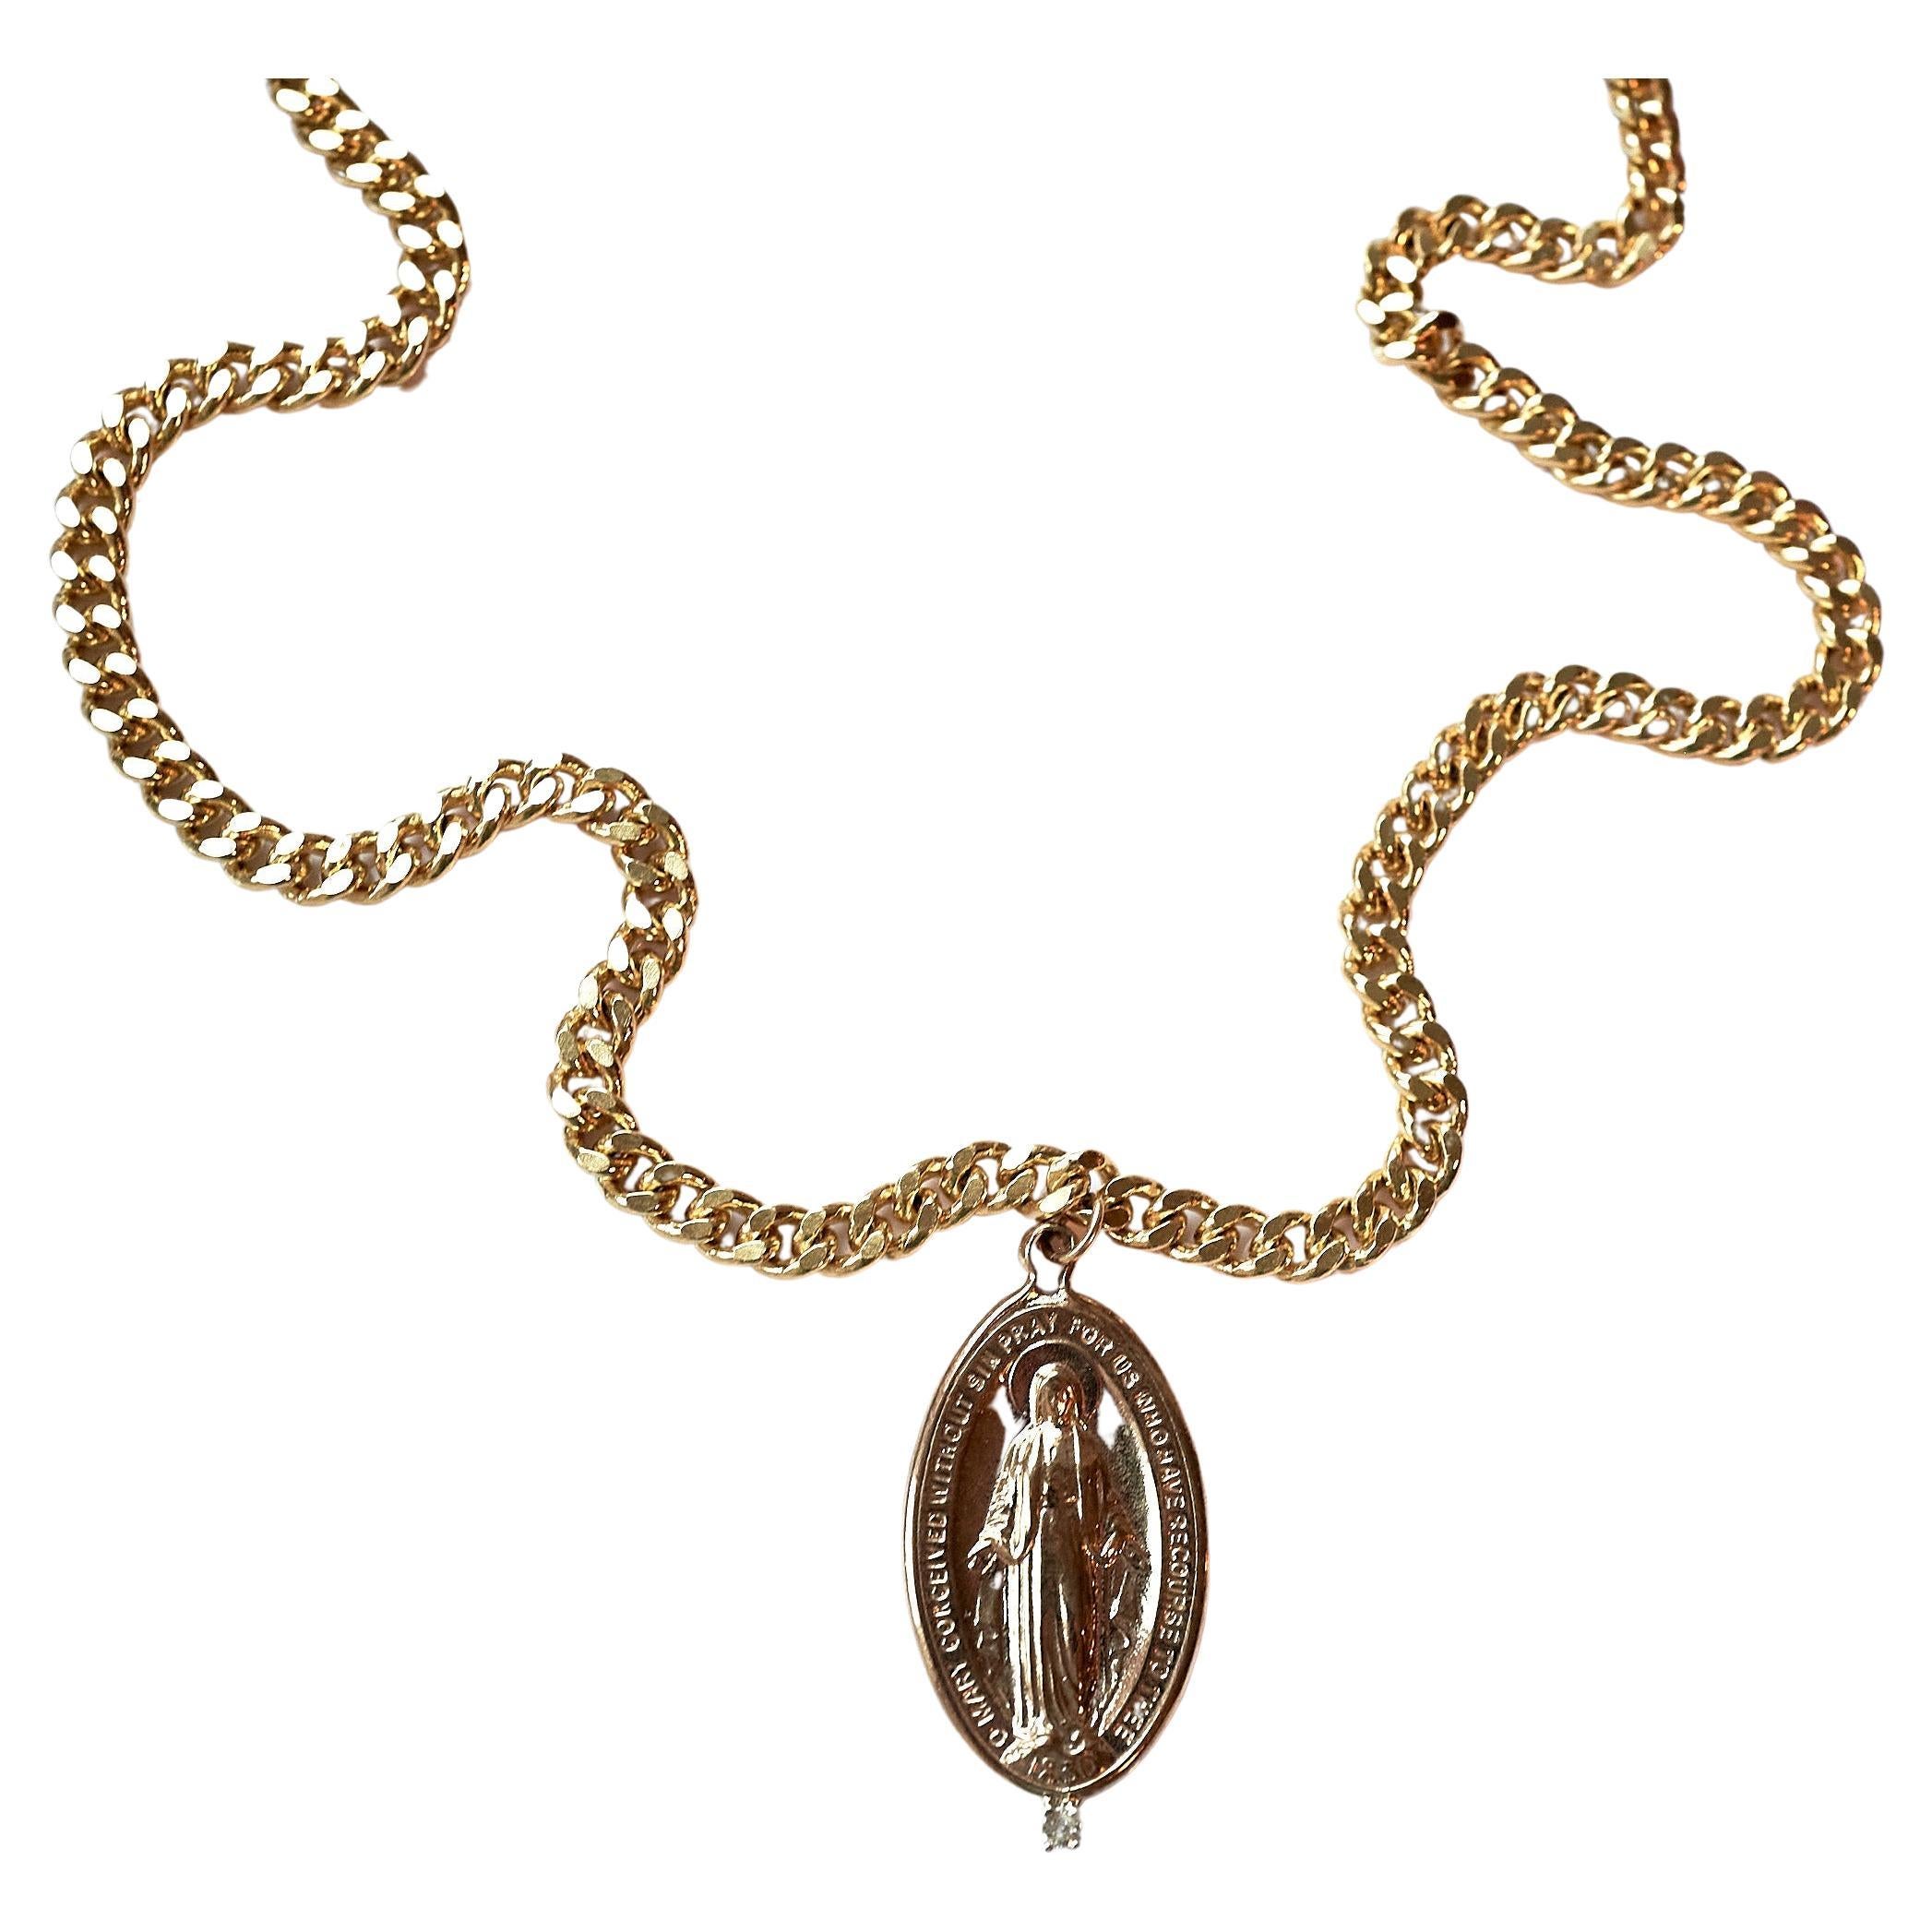 Brilliant Cut White Diamond Medal Virgin Mary Oval Medal Chain Necklace J Dauphin For Sale